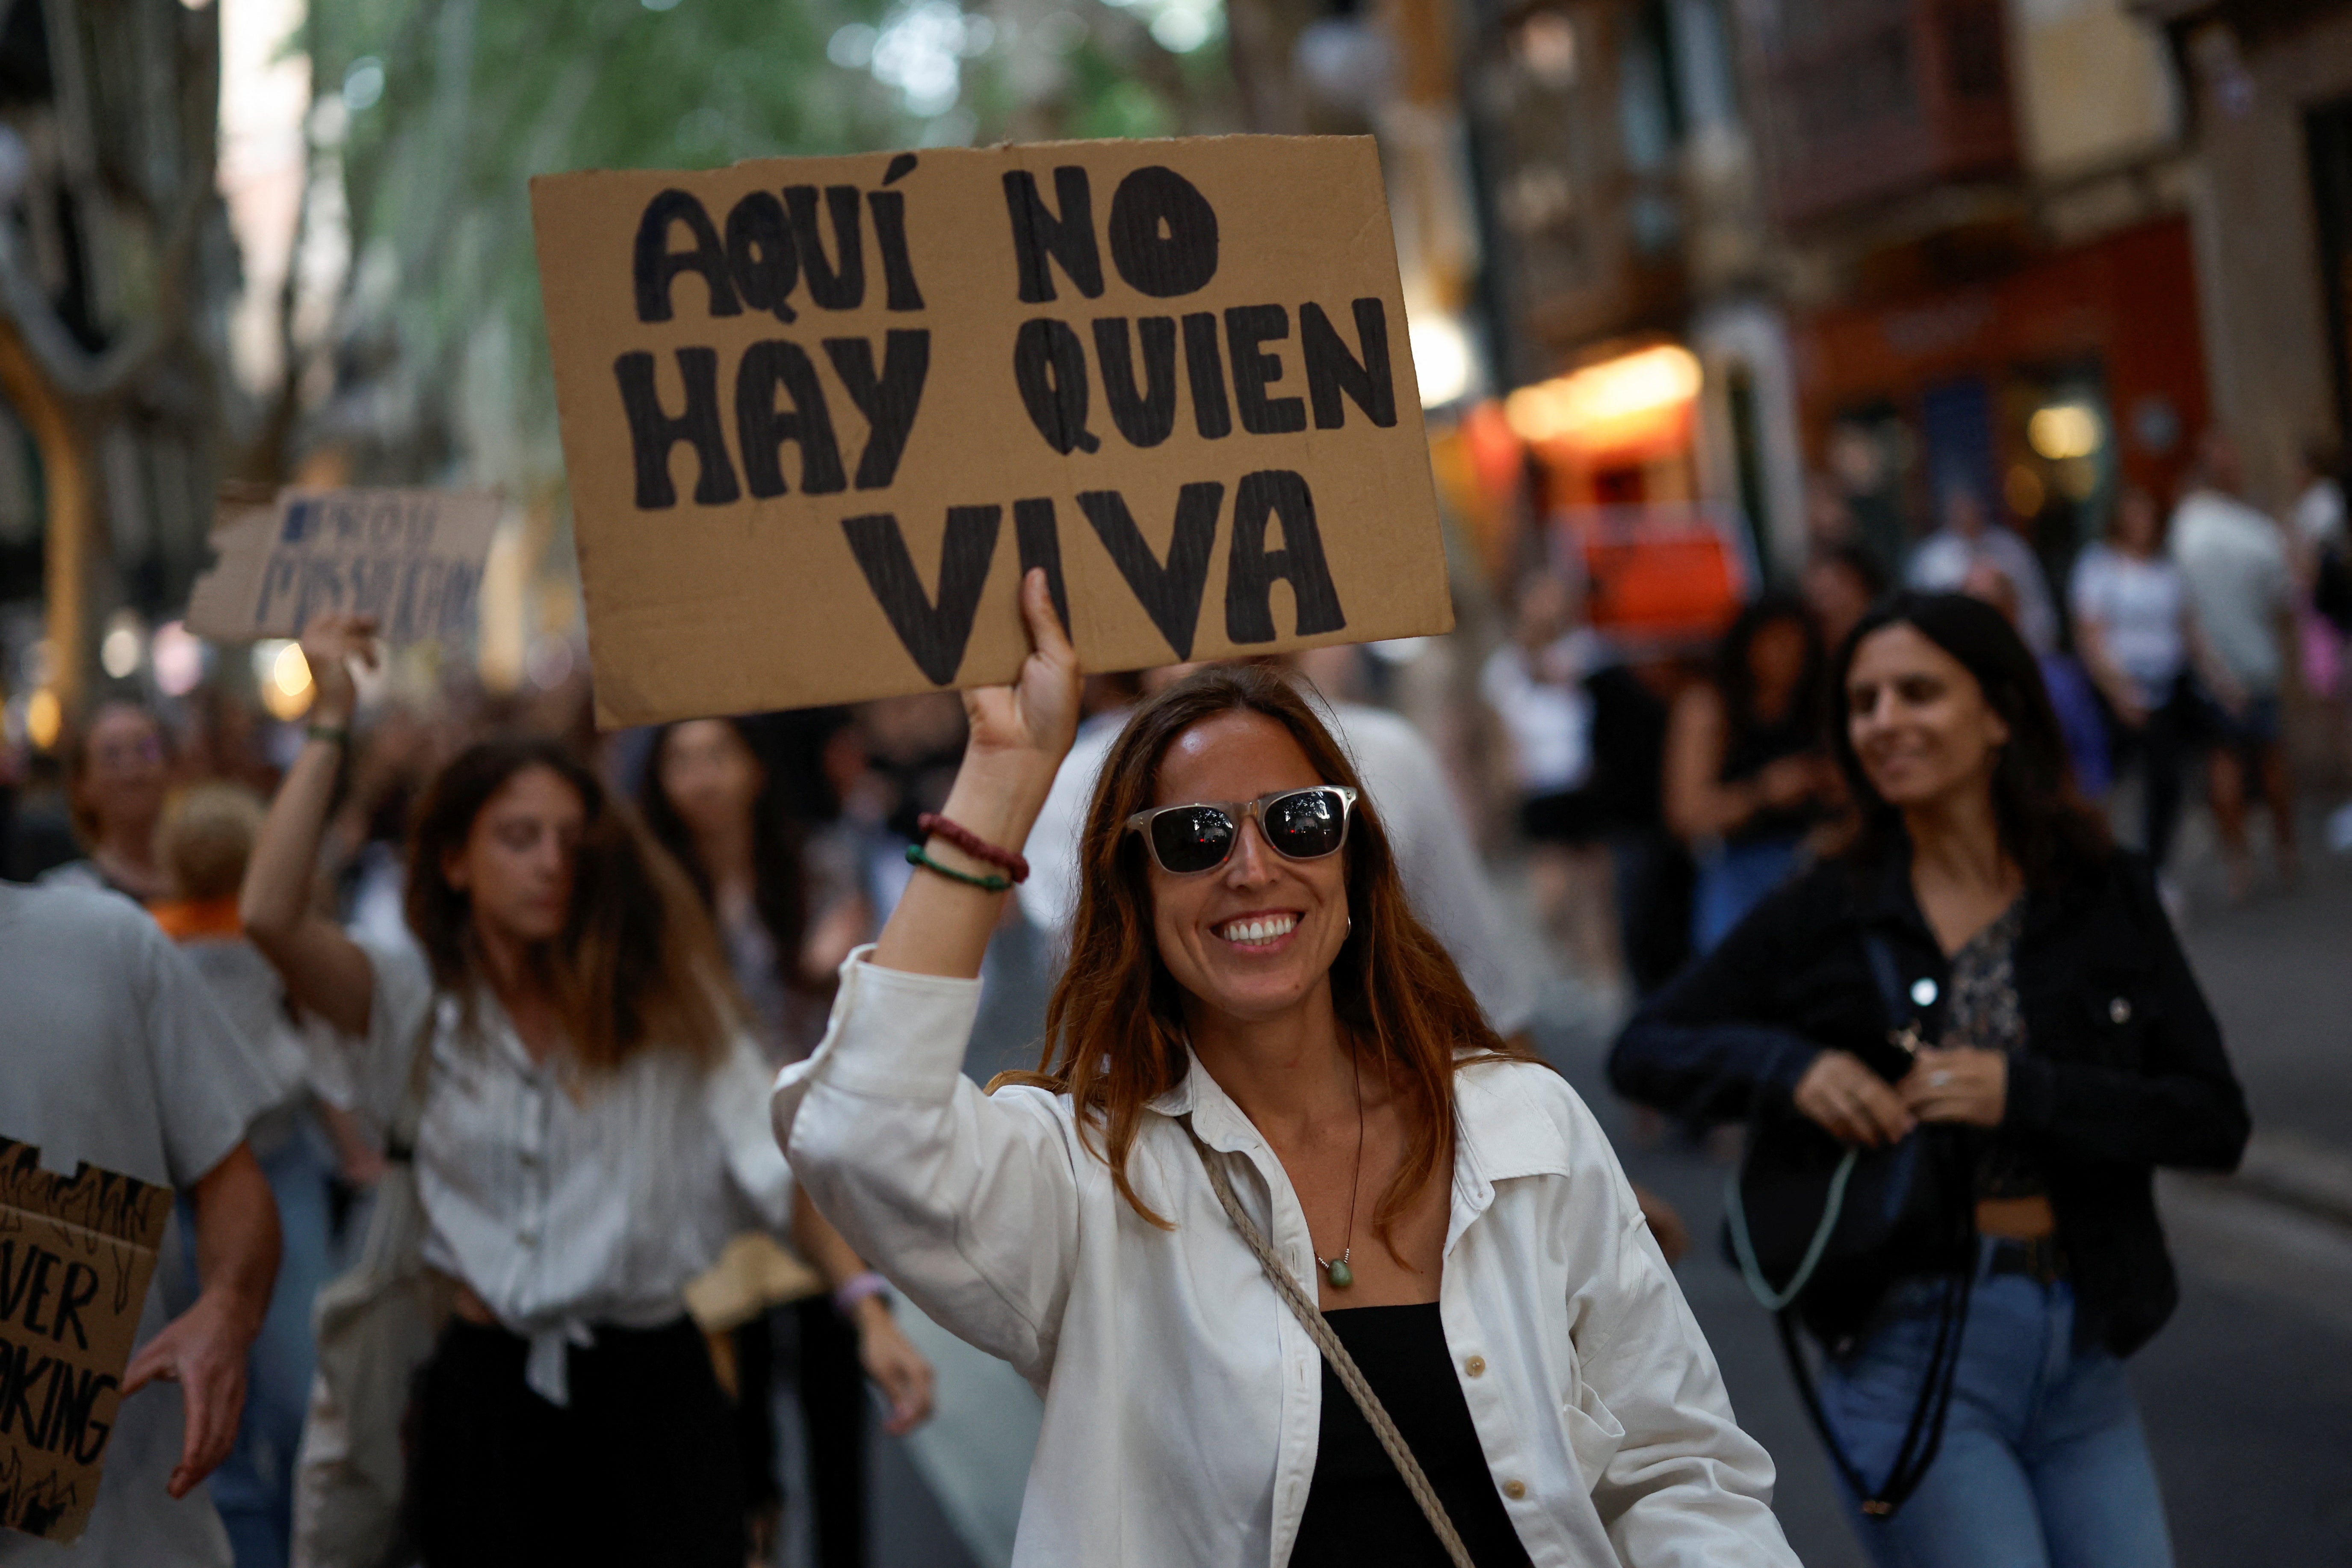 People take part in a protest against mass tourism and gentrification in the island ahead of summer season